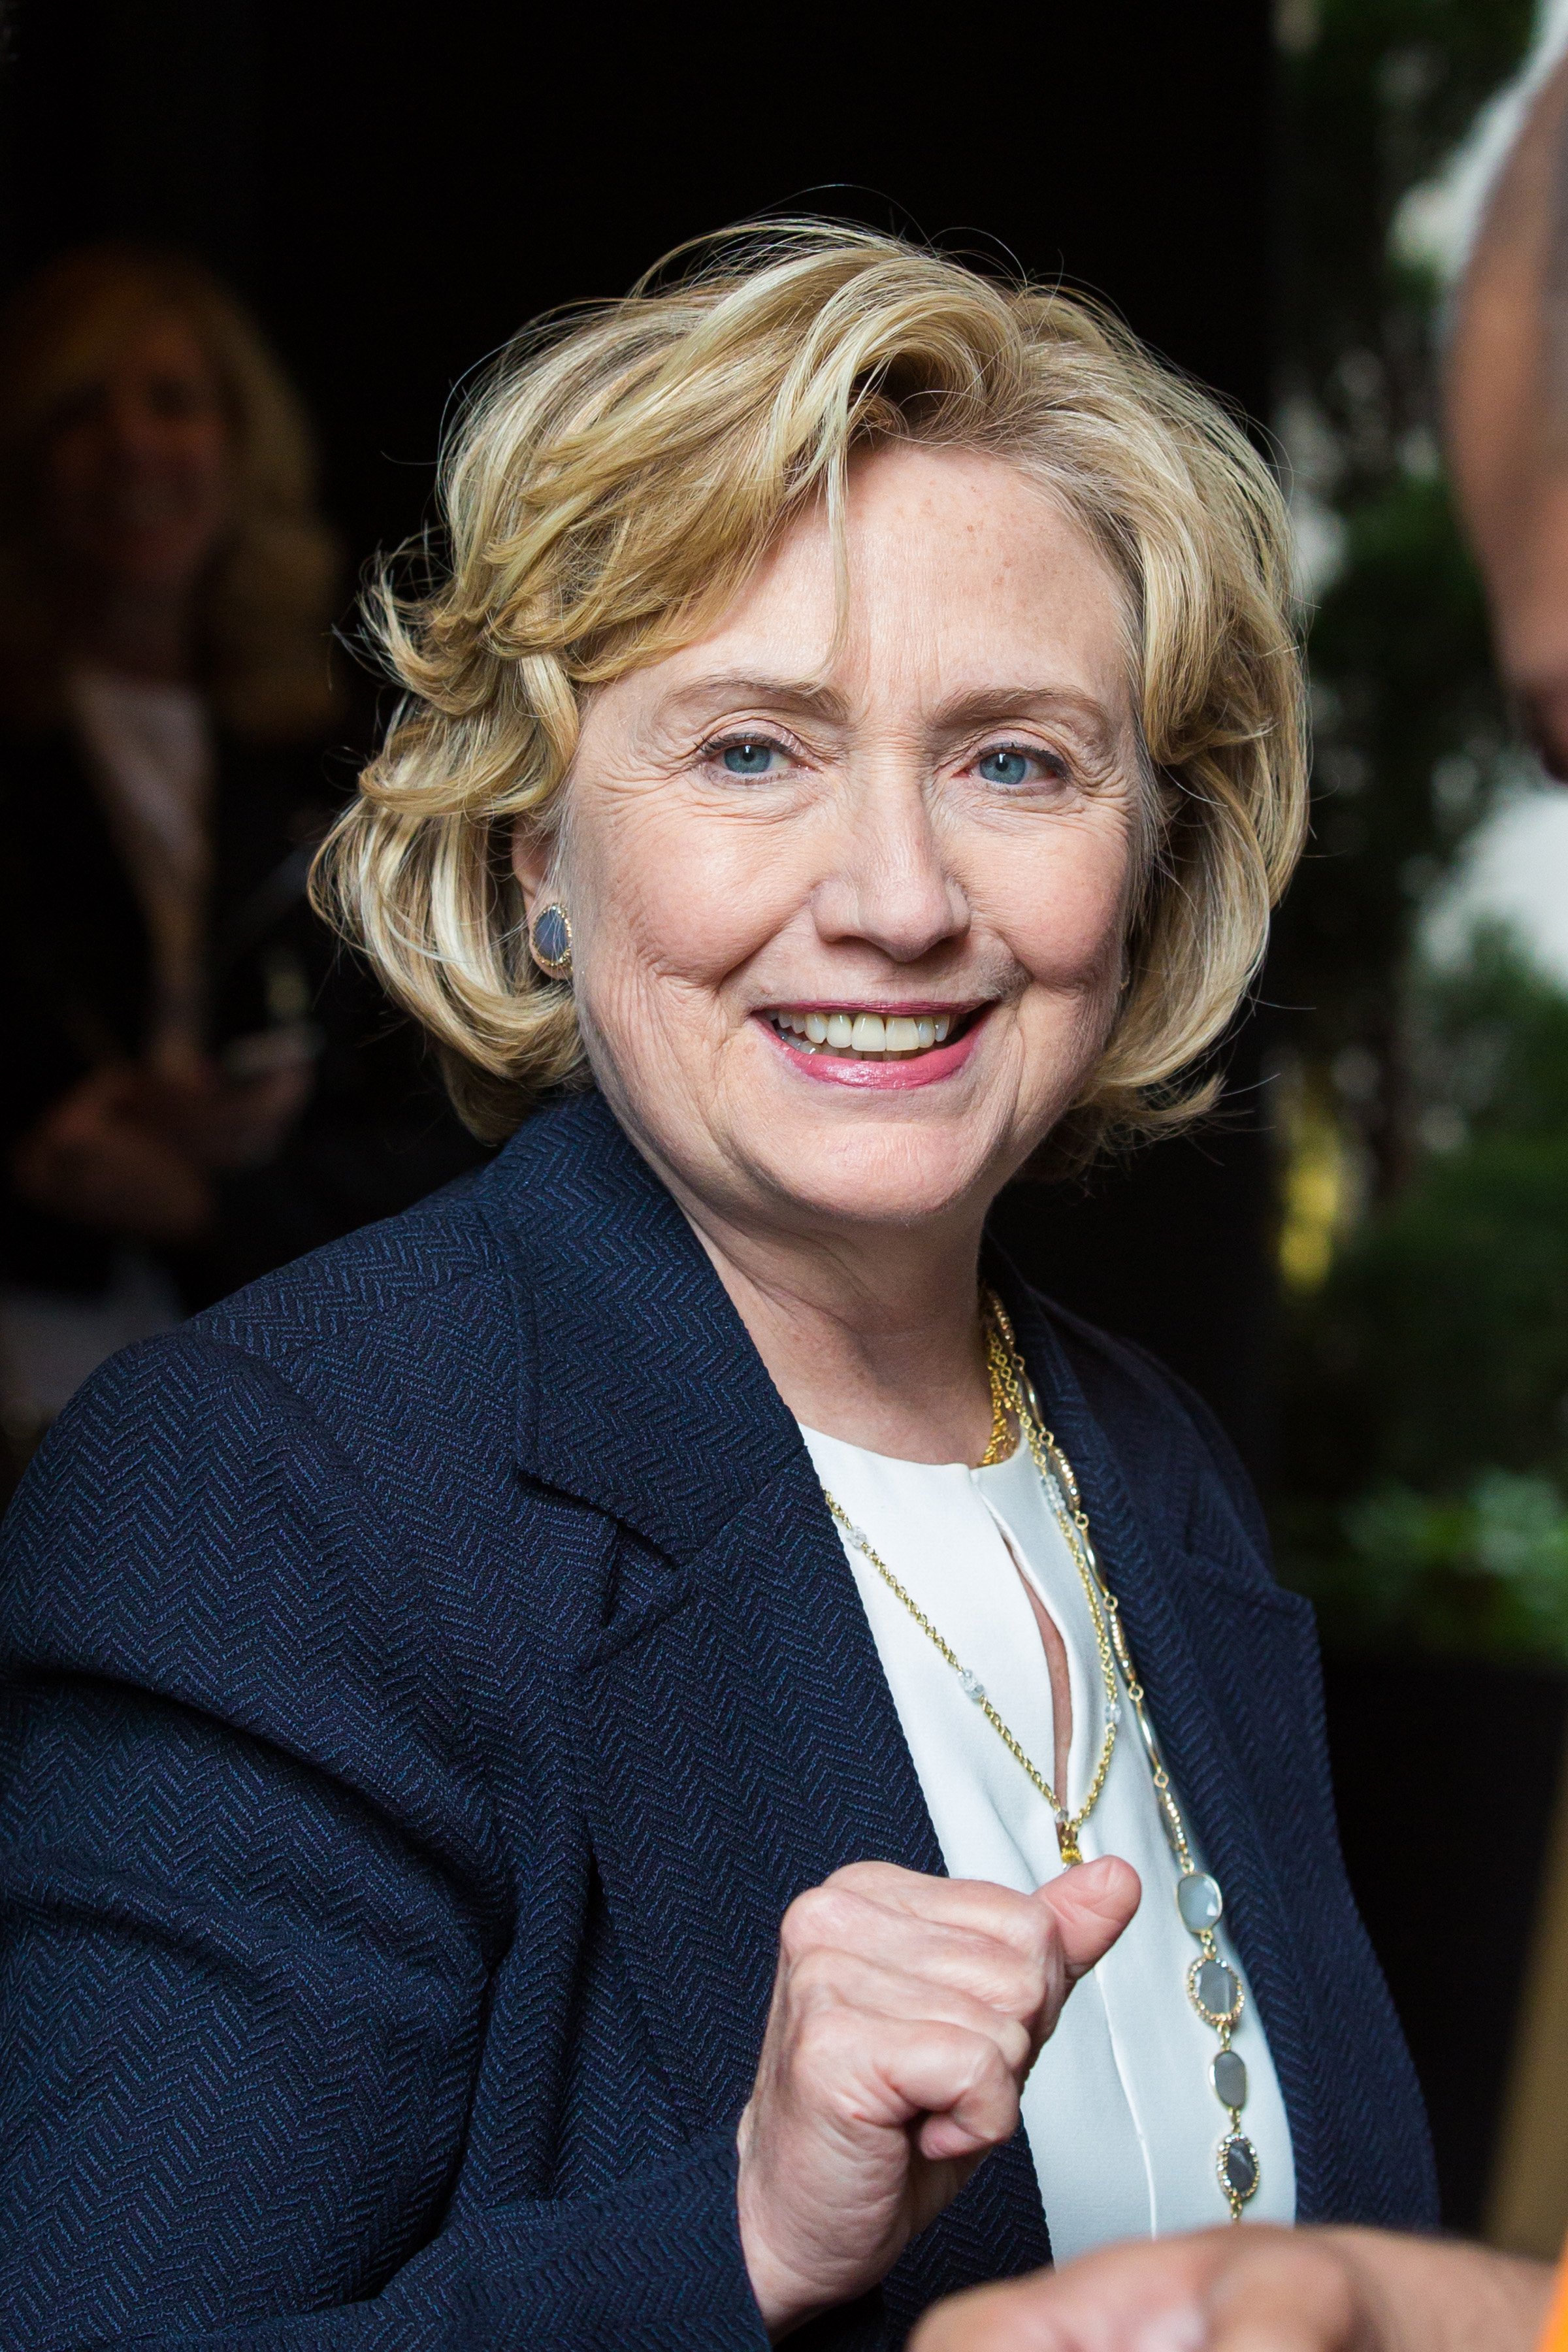 Hillary Clinton is seen arriving at The Carlyle Hotel on July 30, 2014 in New York City. (Alessio Botticelli—GC Images)